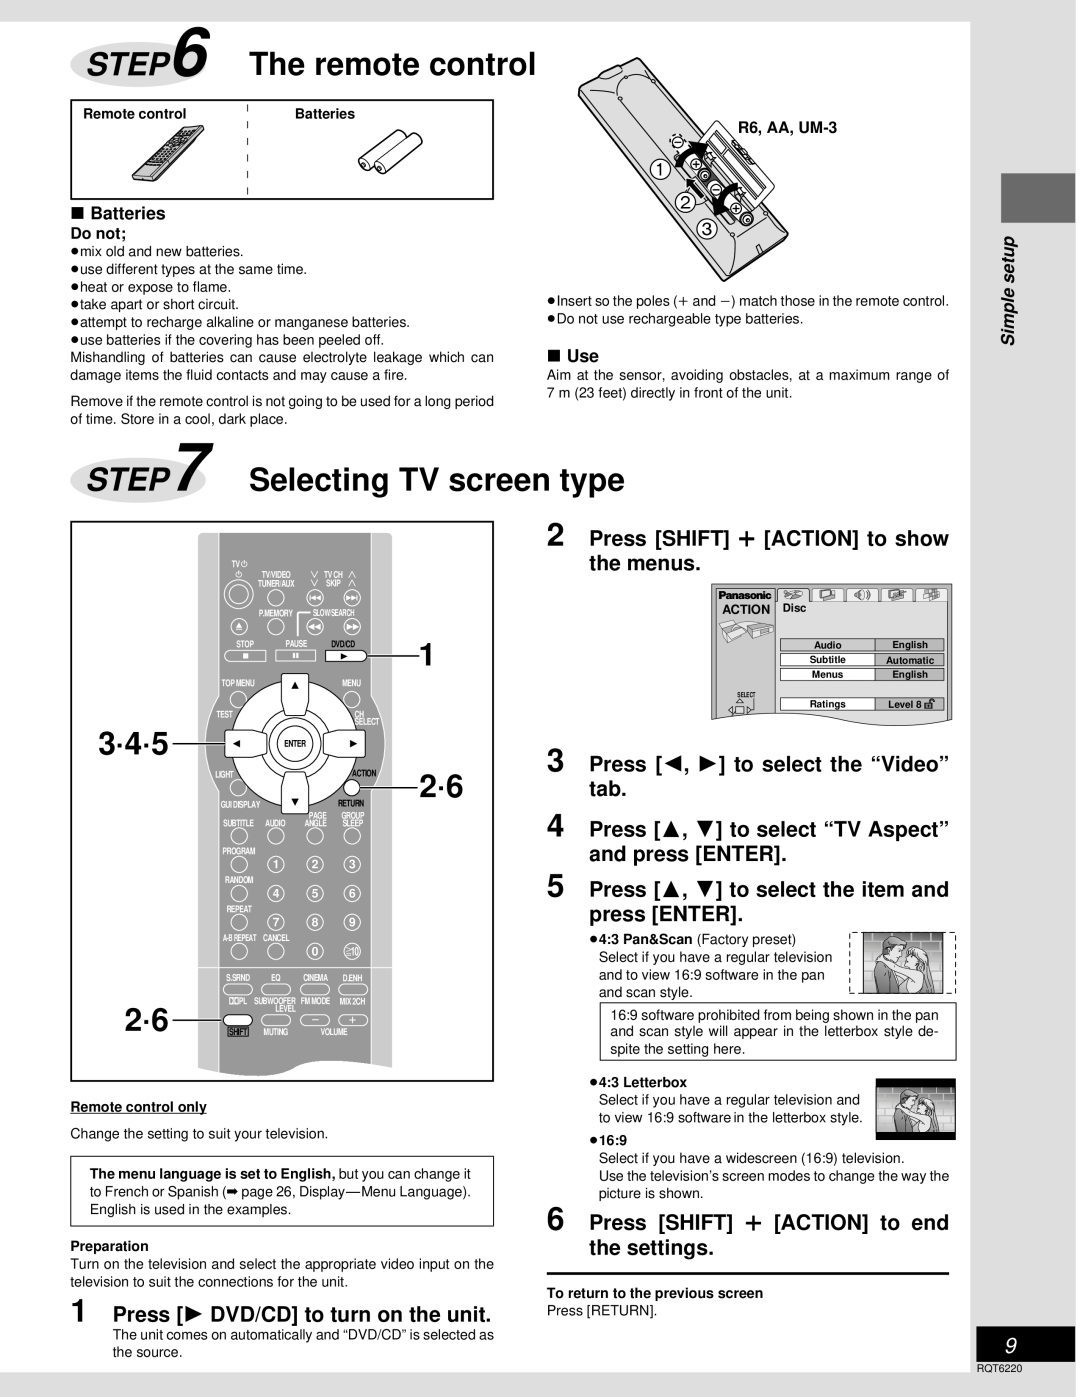 Panasonic SC-DM3 The remote control, Selecting TV screen type, 3·4·5, Press SHIFT r ACTION to show, the menus, press ENTER 